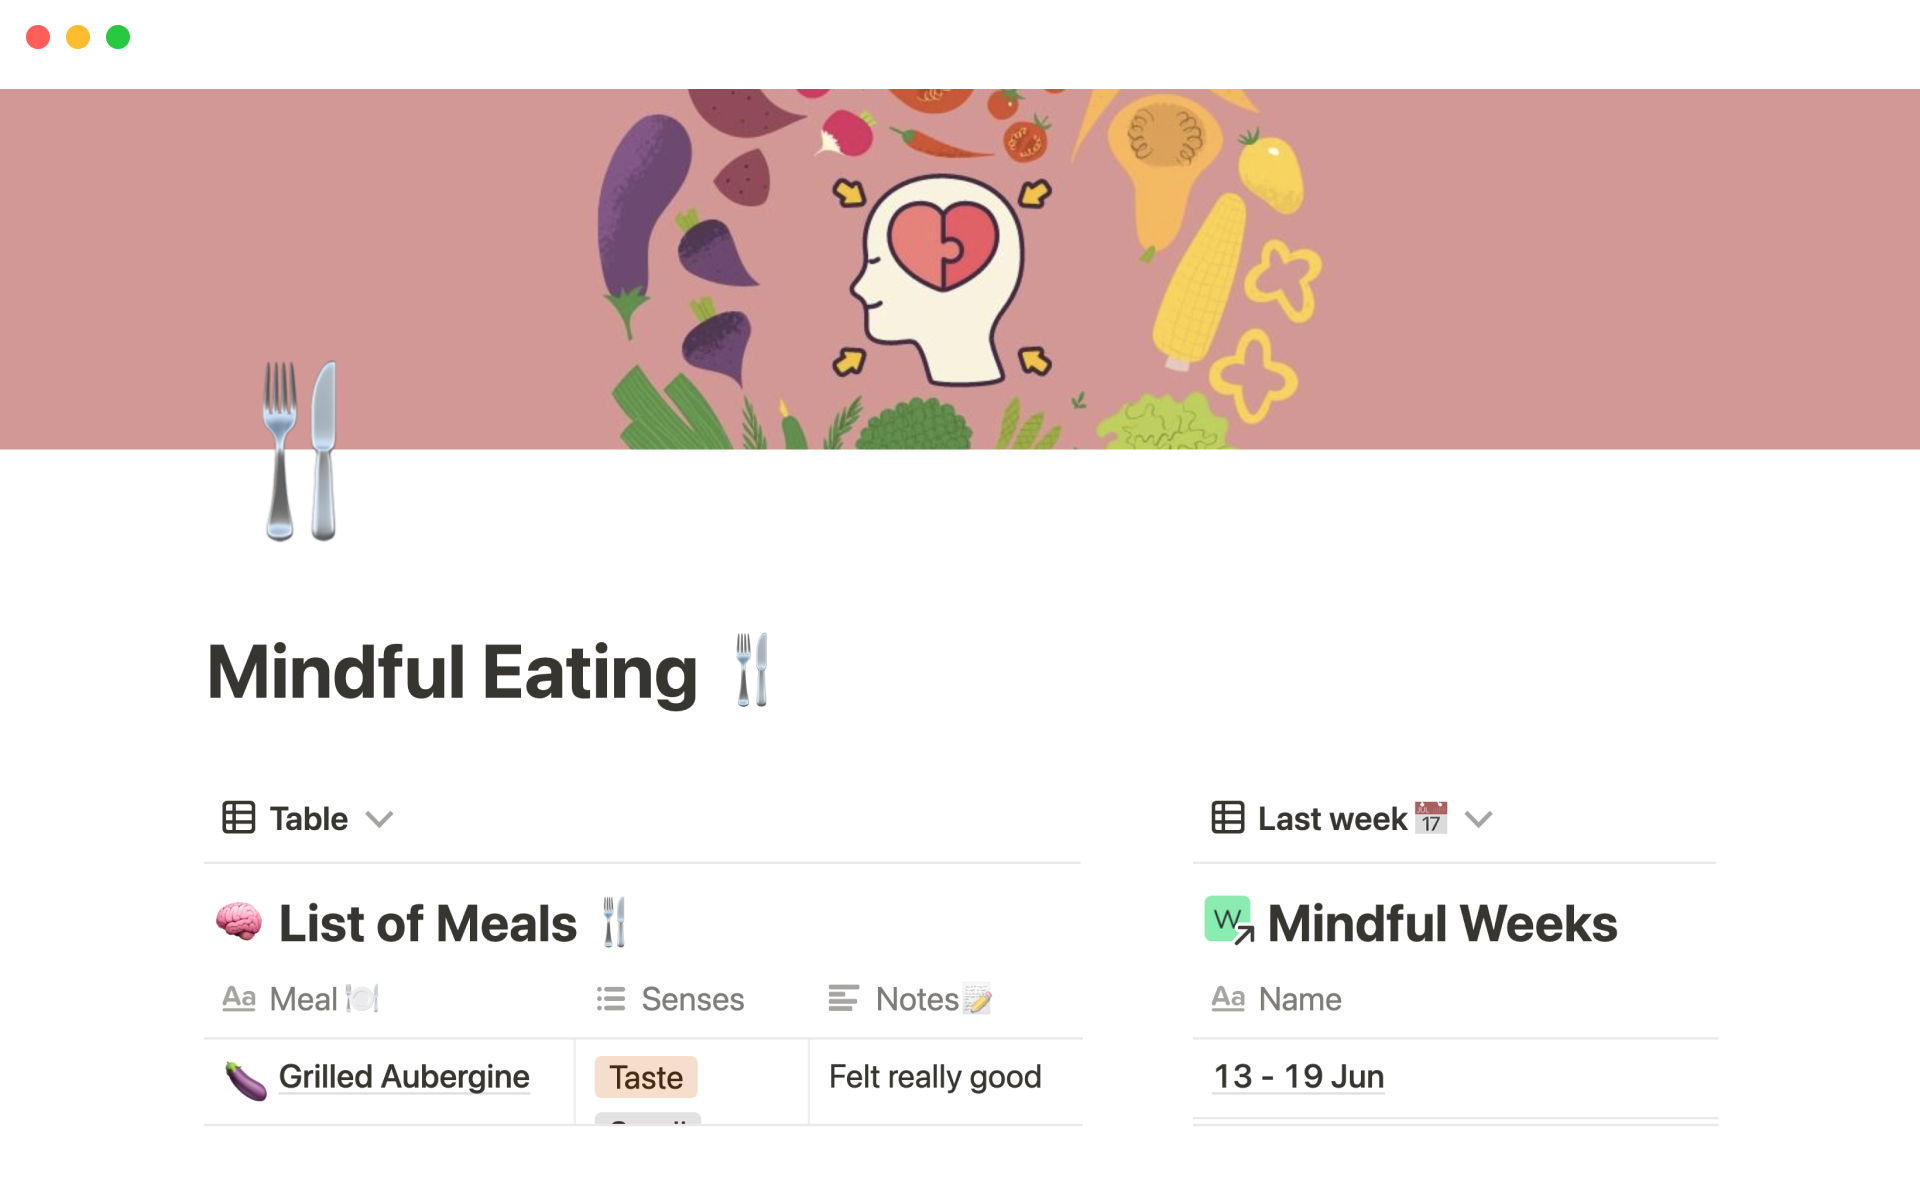 Track your meals and check your mindfulness by focusing on senses.